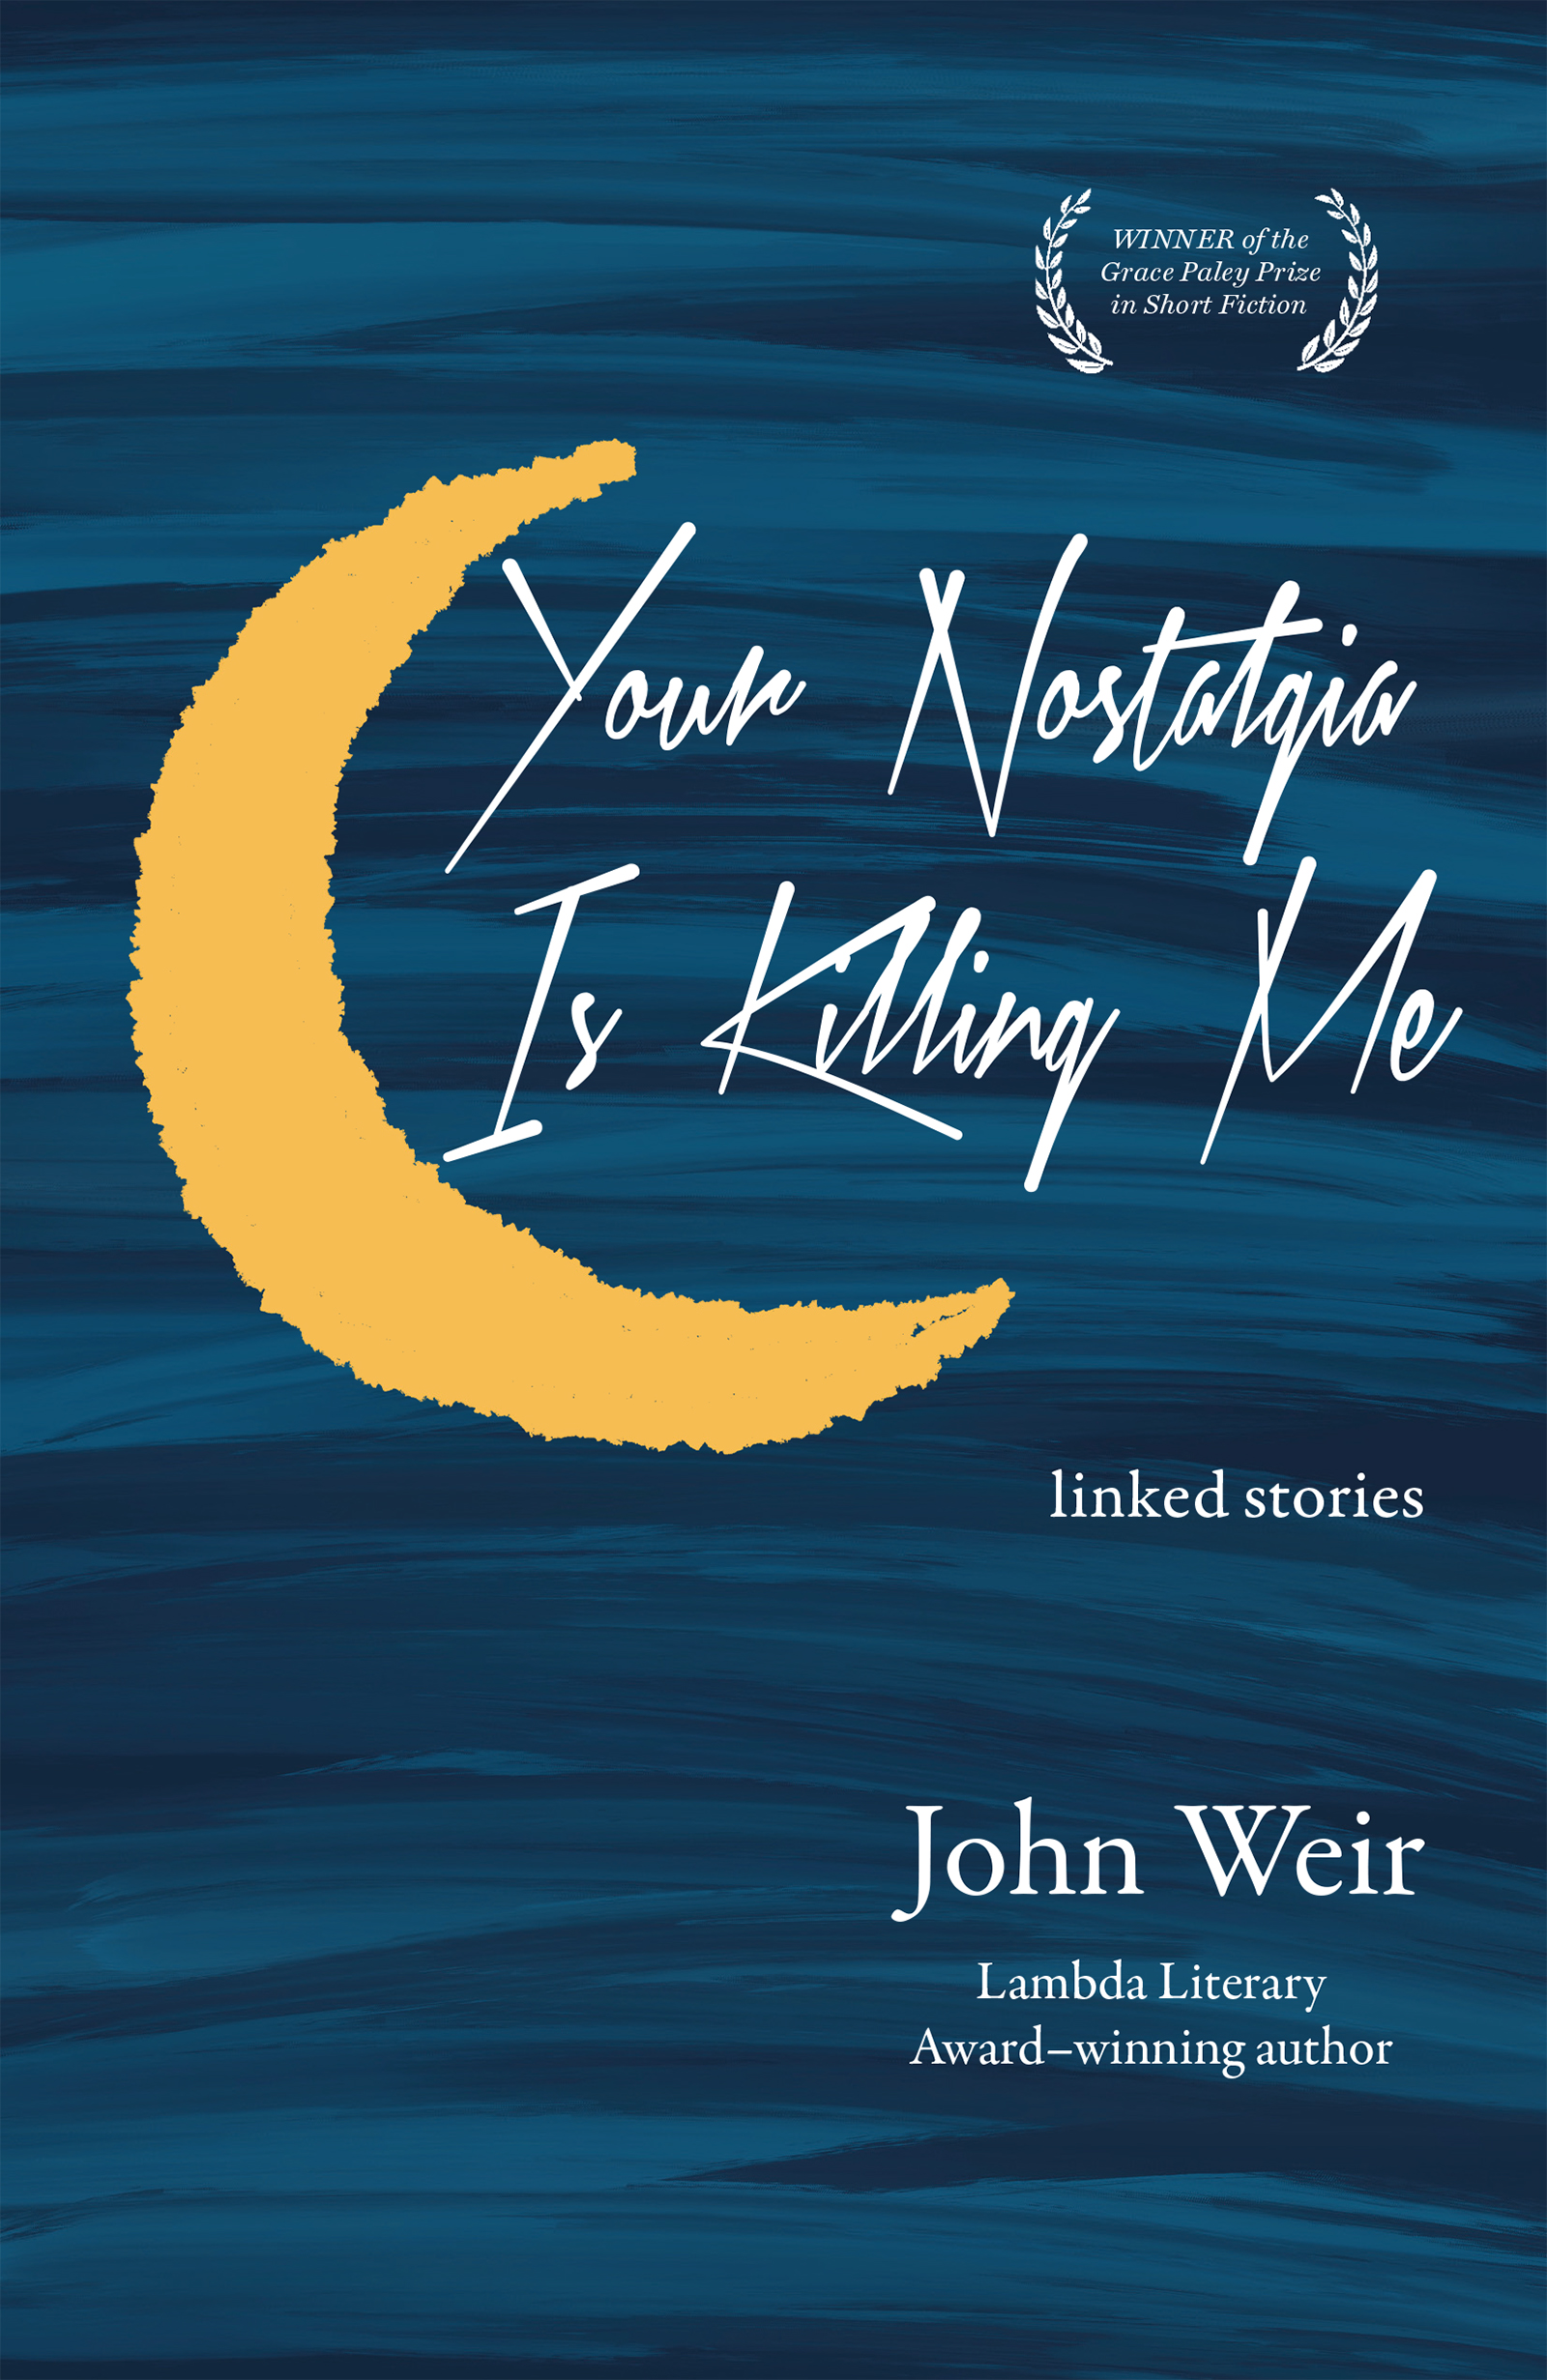 White text stating Your Nostalgia is Killing Me linked stories by John Weir over a blue paint-stroked background with a yellow crescent moon.